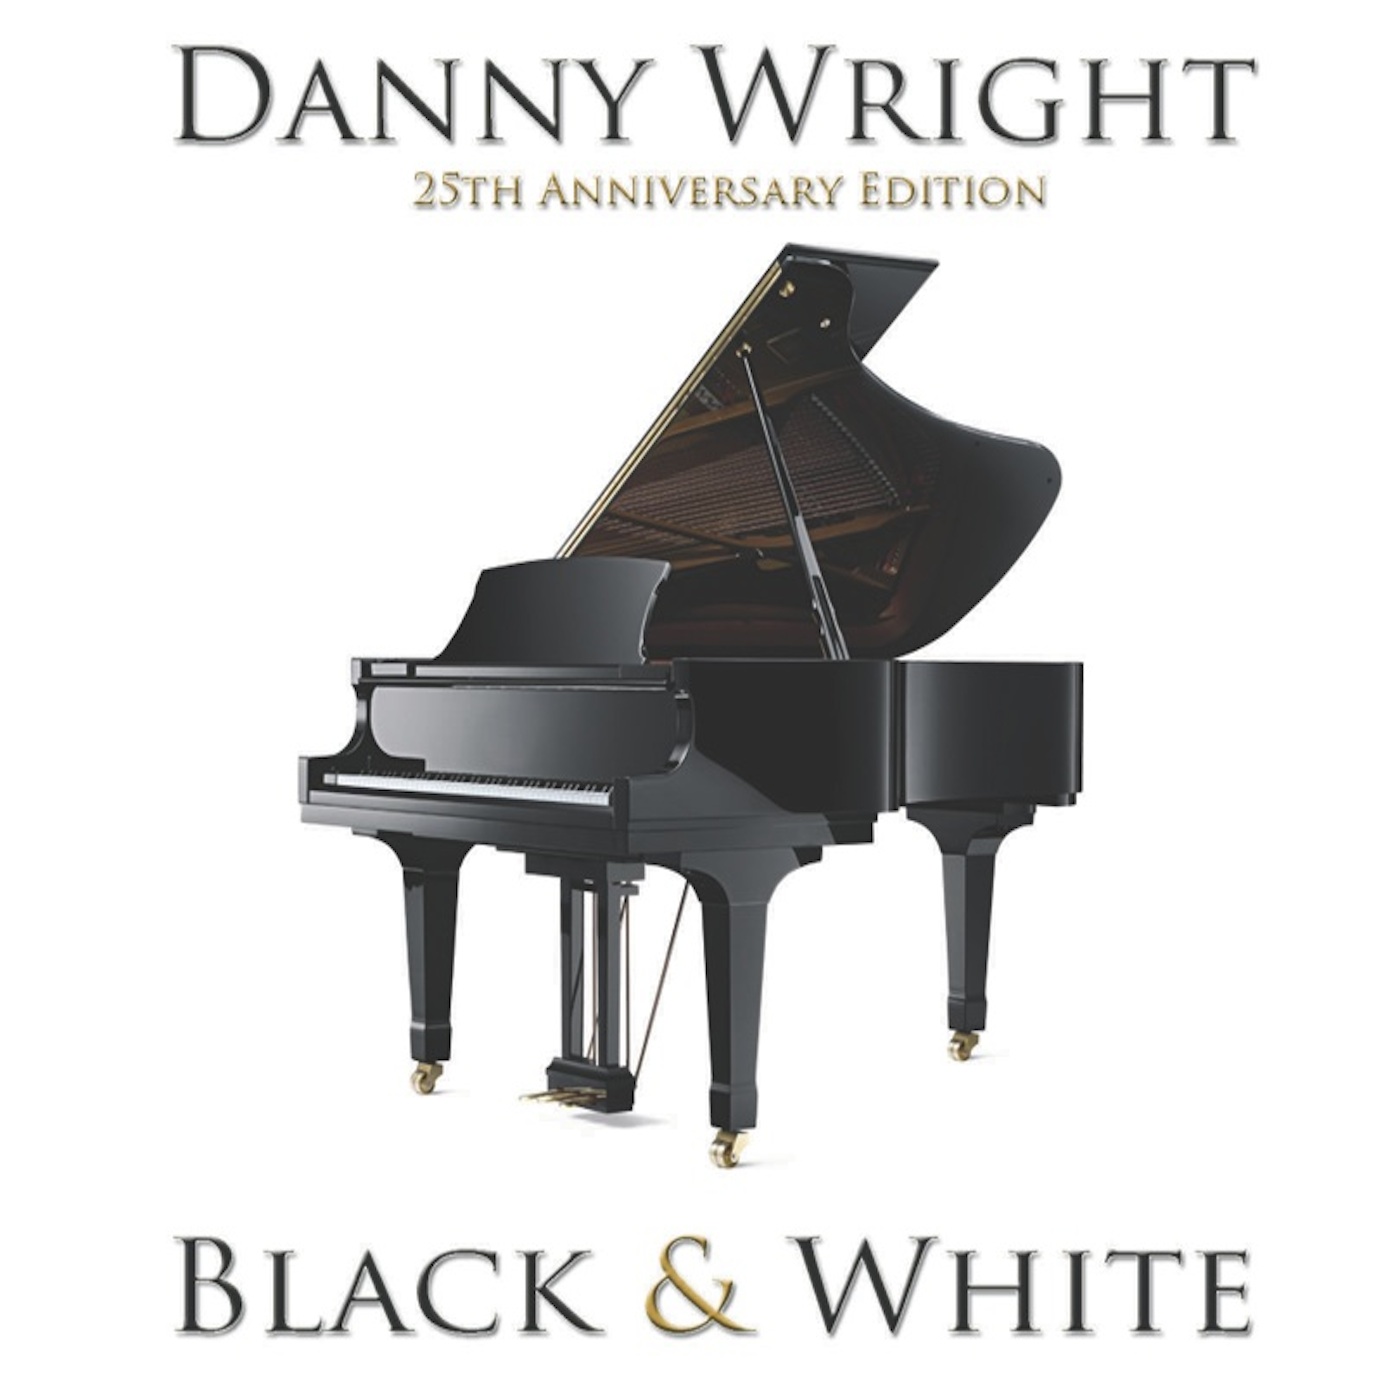 Black & White: The 25th Anniversary Edition by Danny Wright